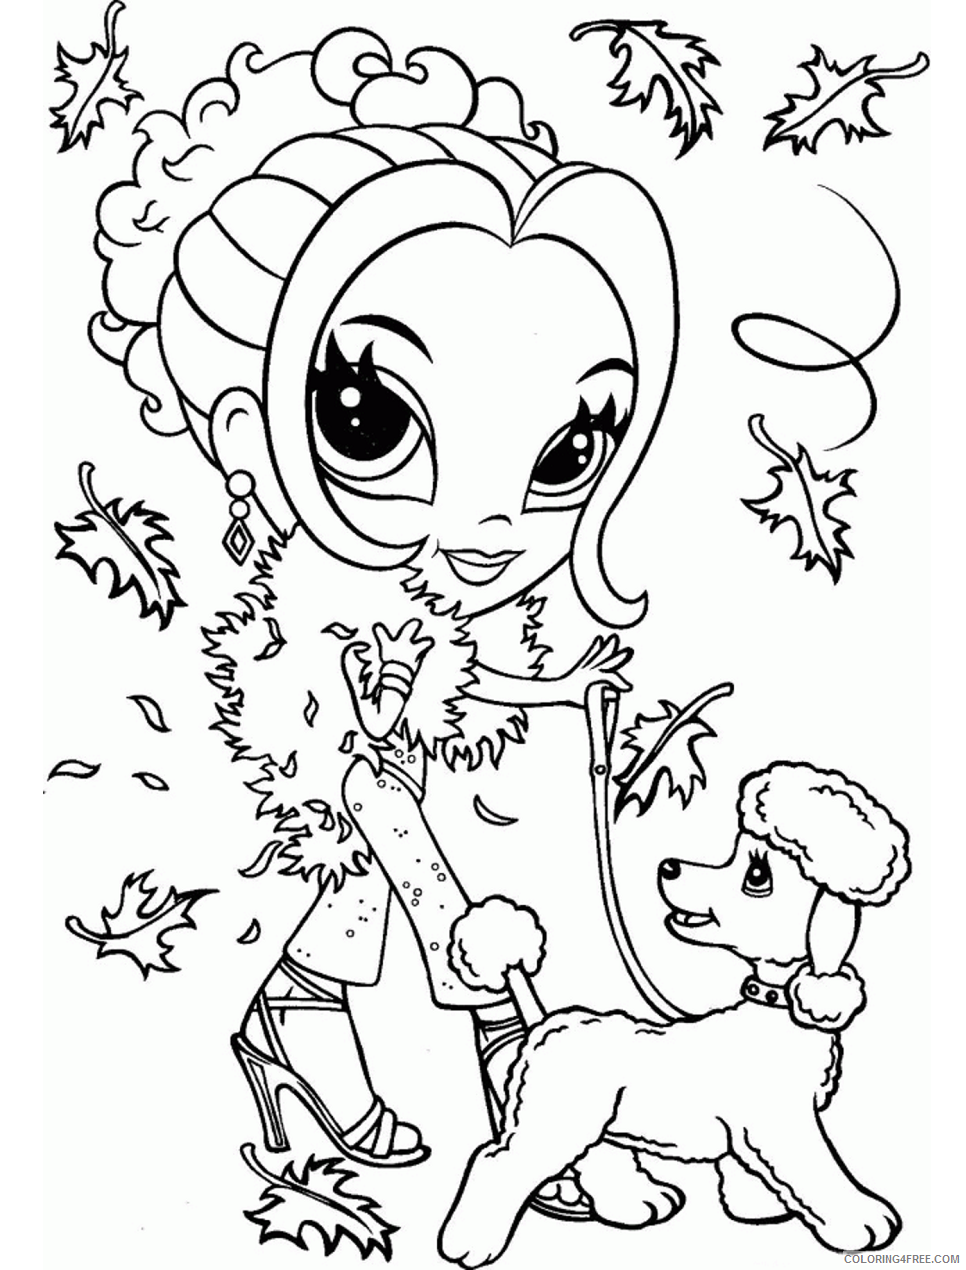 Poodle Coloring Pages Animal Printable Sheets glamour_girl_with_poodle 2021 4010 Coloring4free